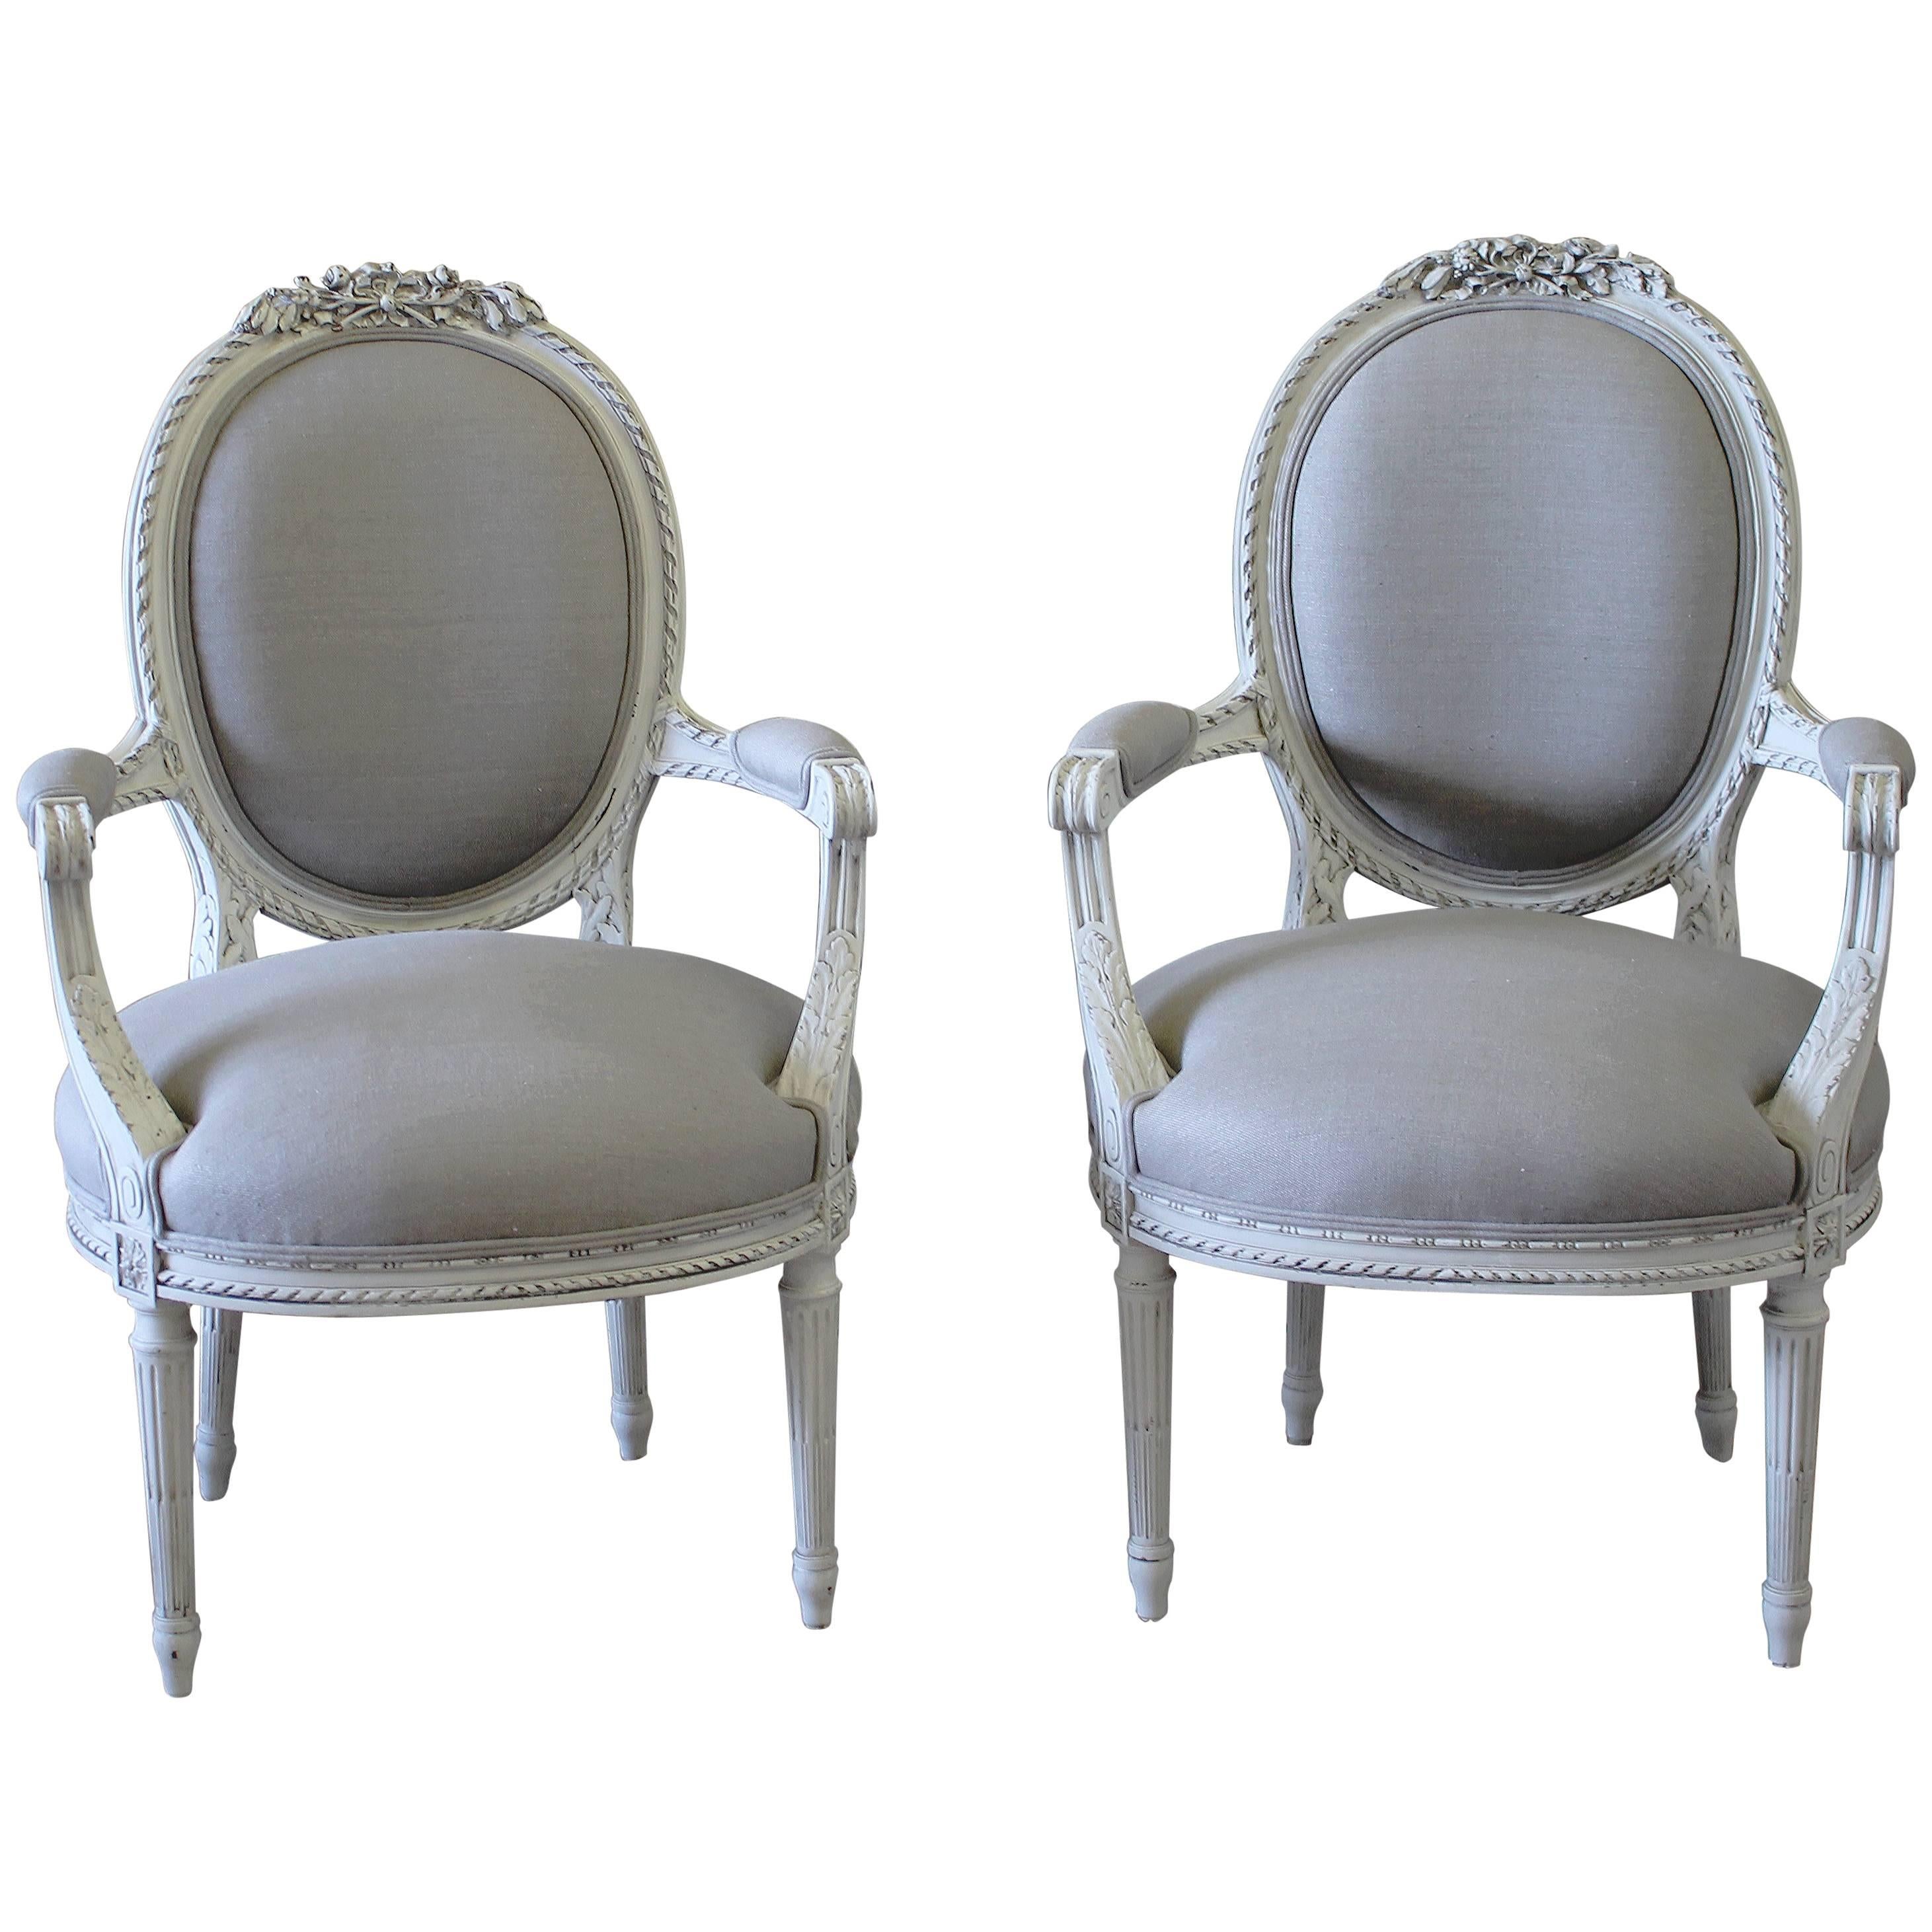 Pair of 19th Century Louis XVI Painted French Fauteuils Armchairs in Grey Linen